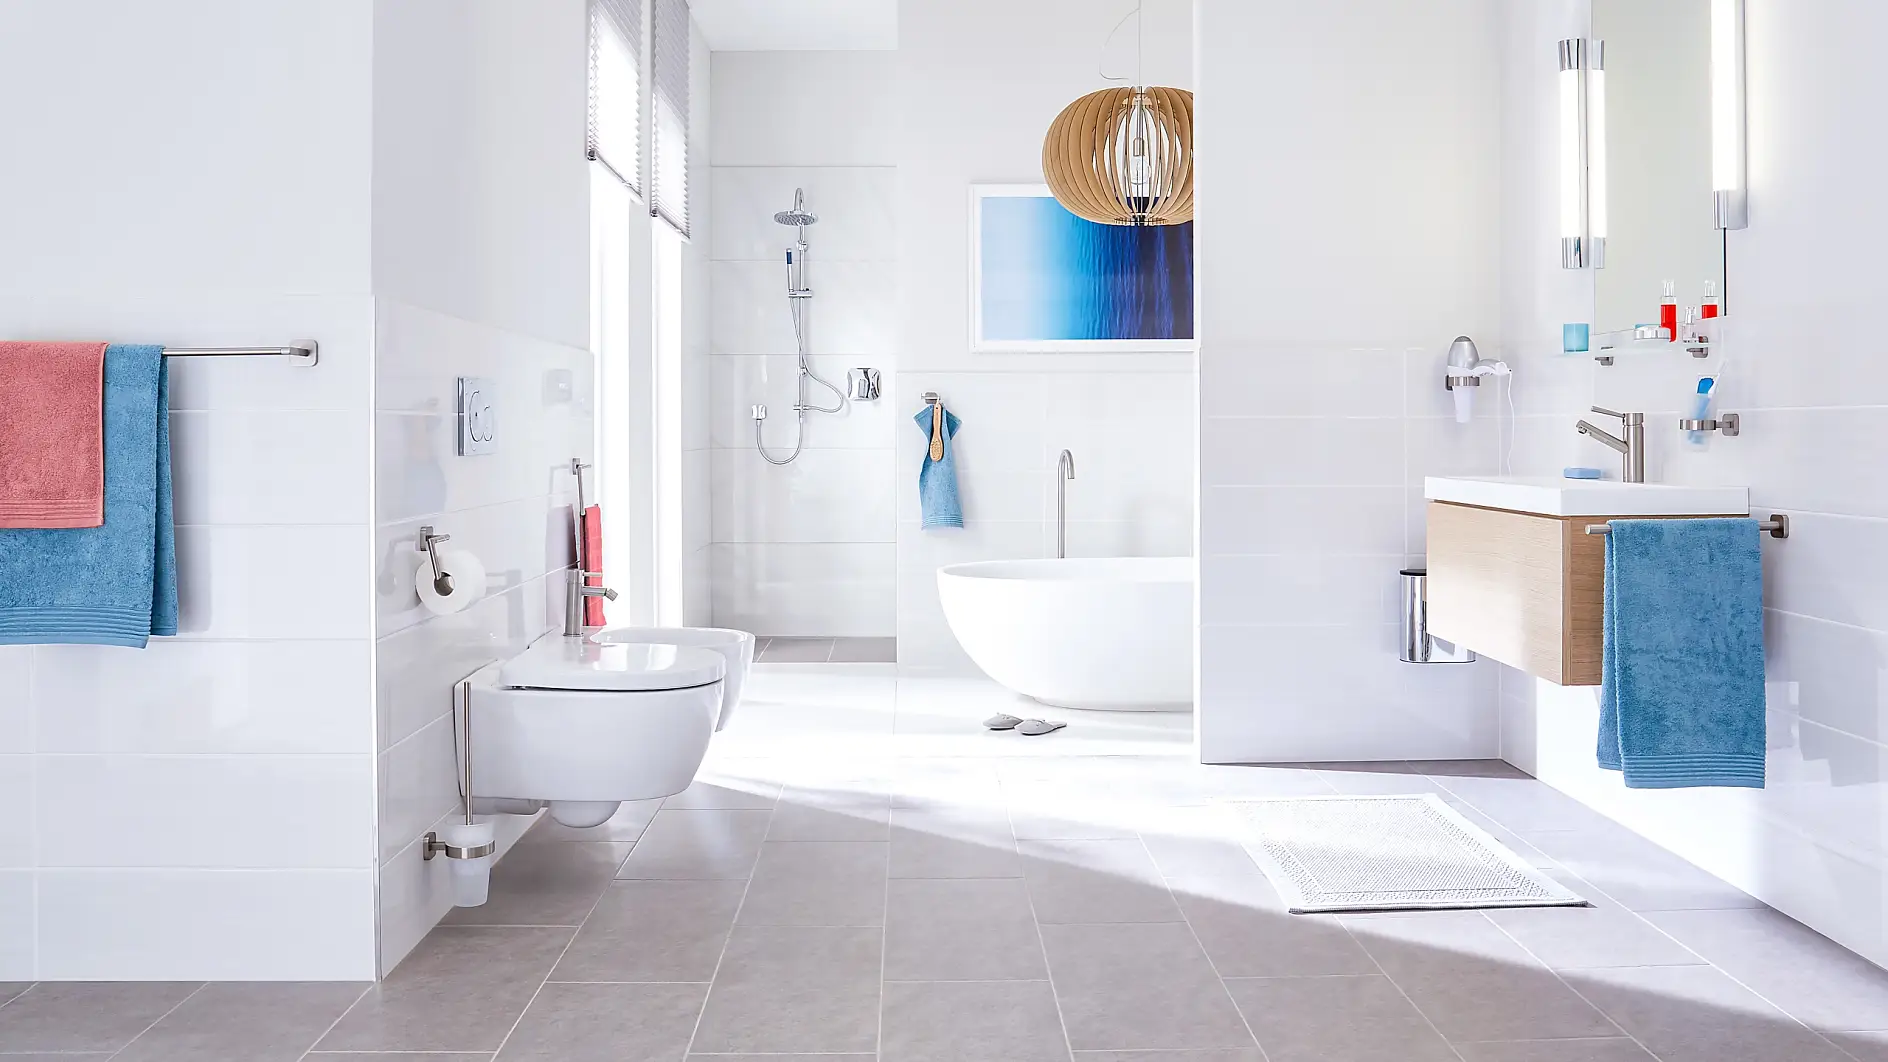 Aesthetic design and functional forms for your bathroom.